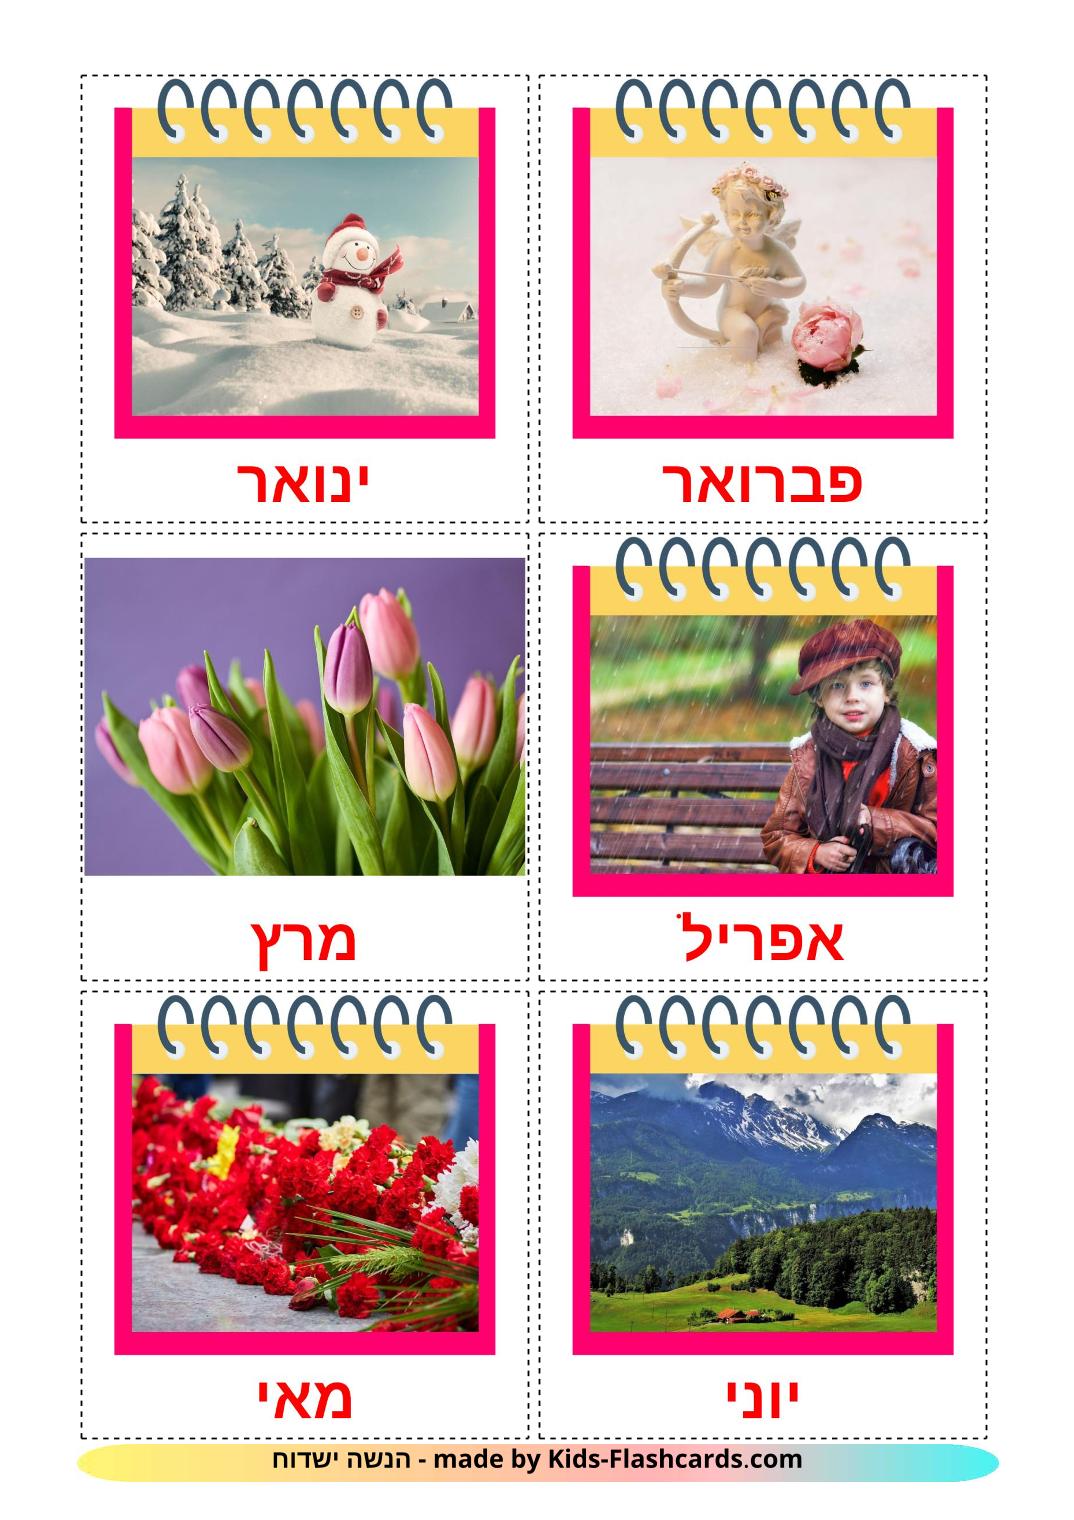 Months of the Year - 12 Free Printable hebrew Flashcards 